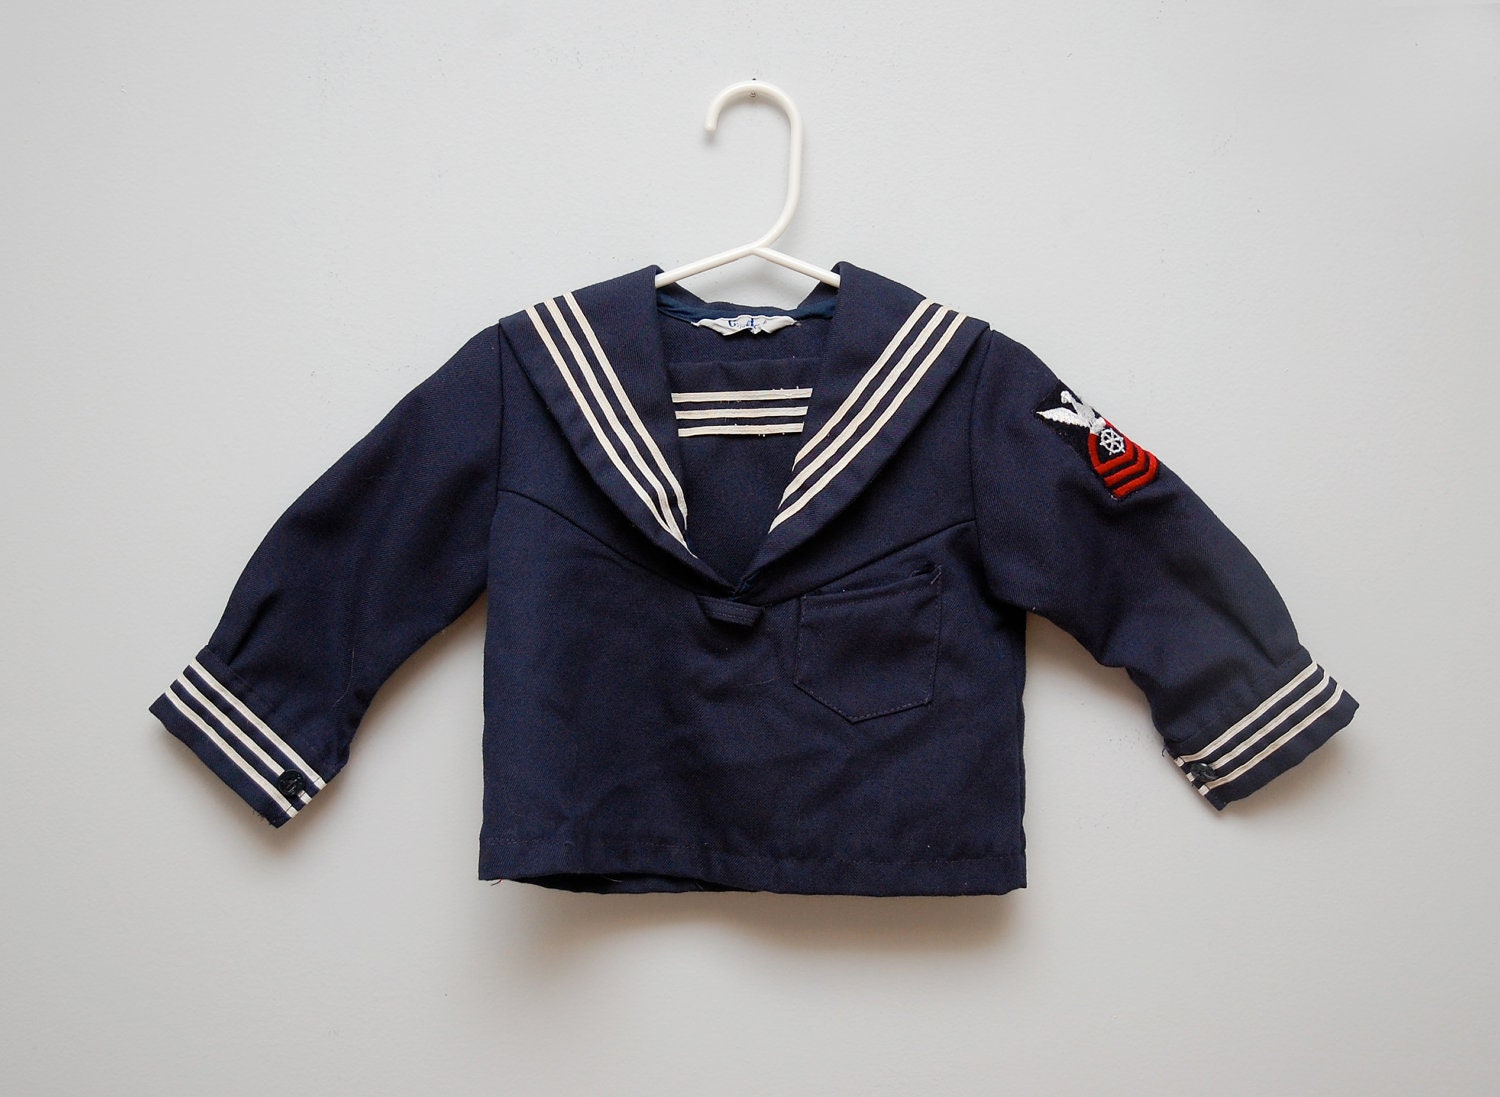 Vintage toddler's sailor outfit